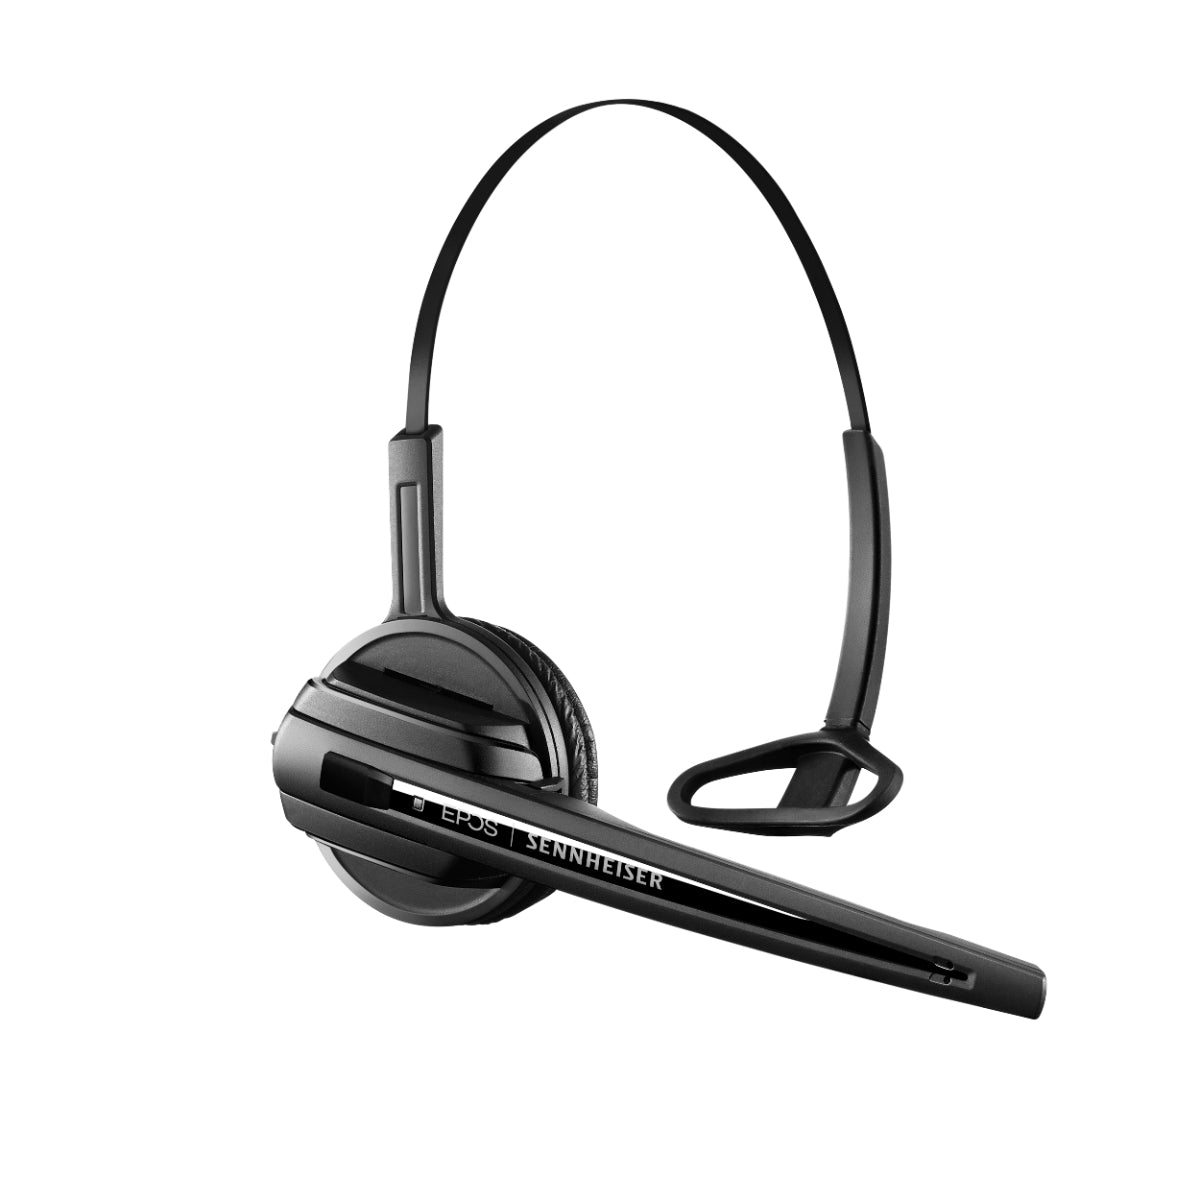 EPOS IMPACT D 10 HS Wireless Monaural DECT Headset, Black, Headband/Earhook without Base Station